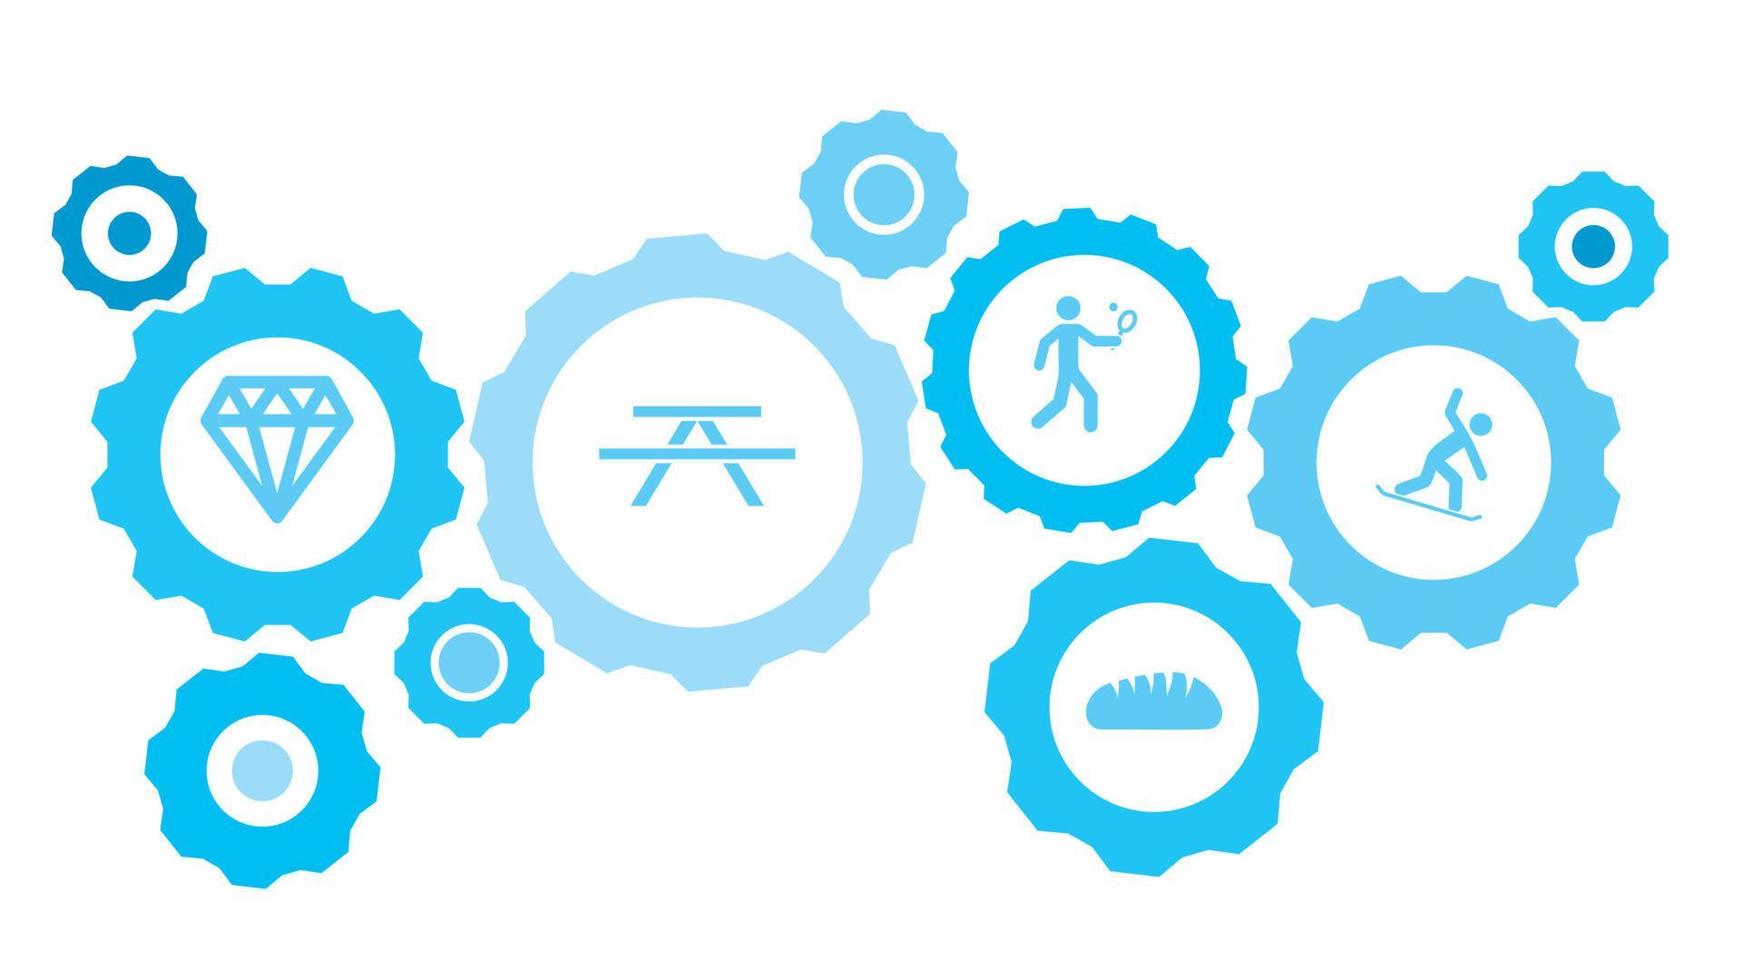 Snowboard gear blue icon set. Abstract background with connected gears and icons for logistic, service, shipping, distribution, transport, market, communicate concepts vector